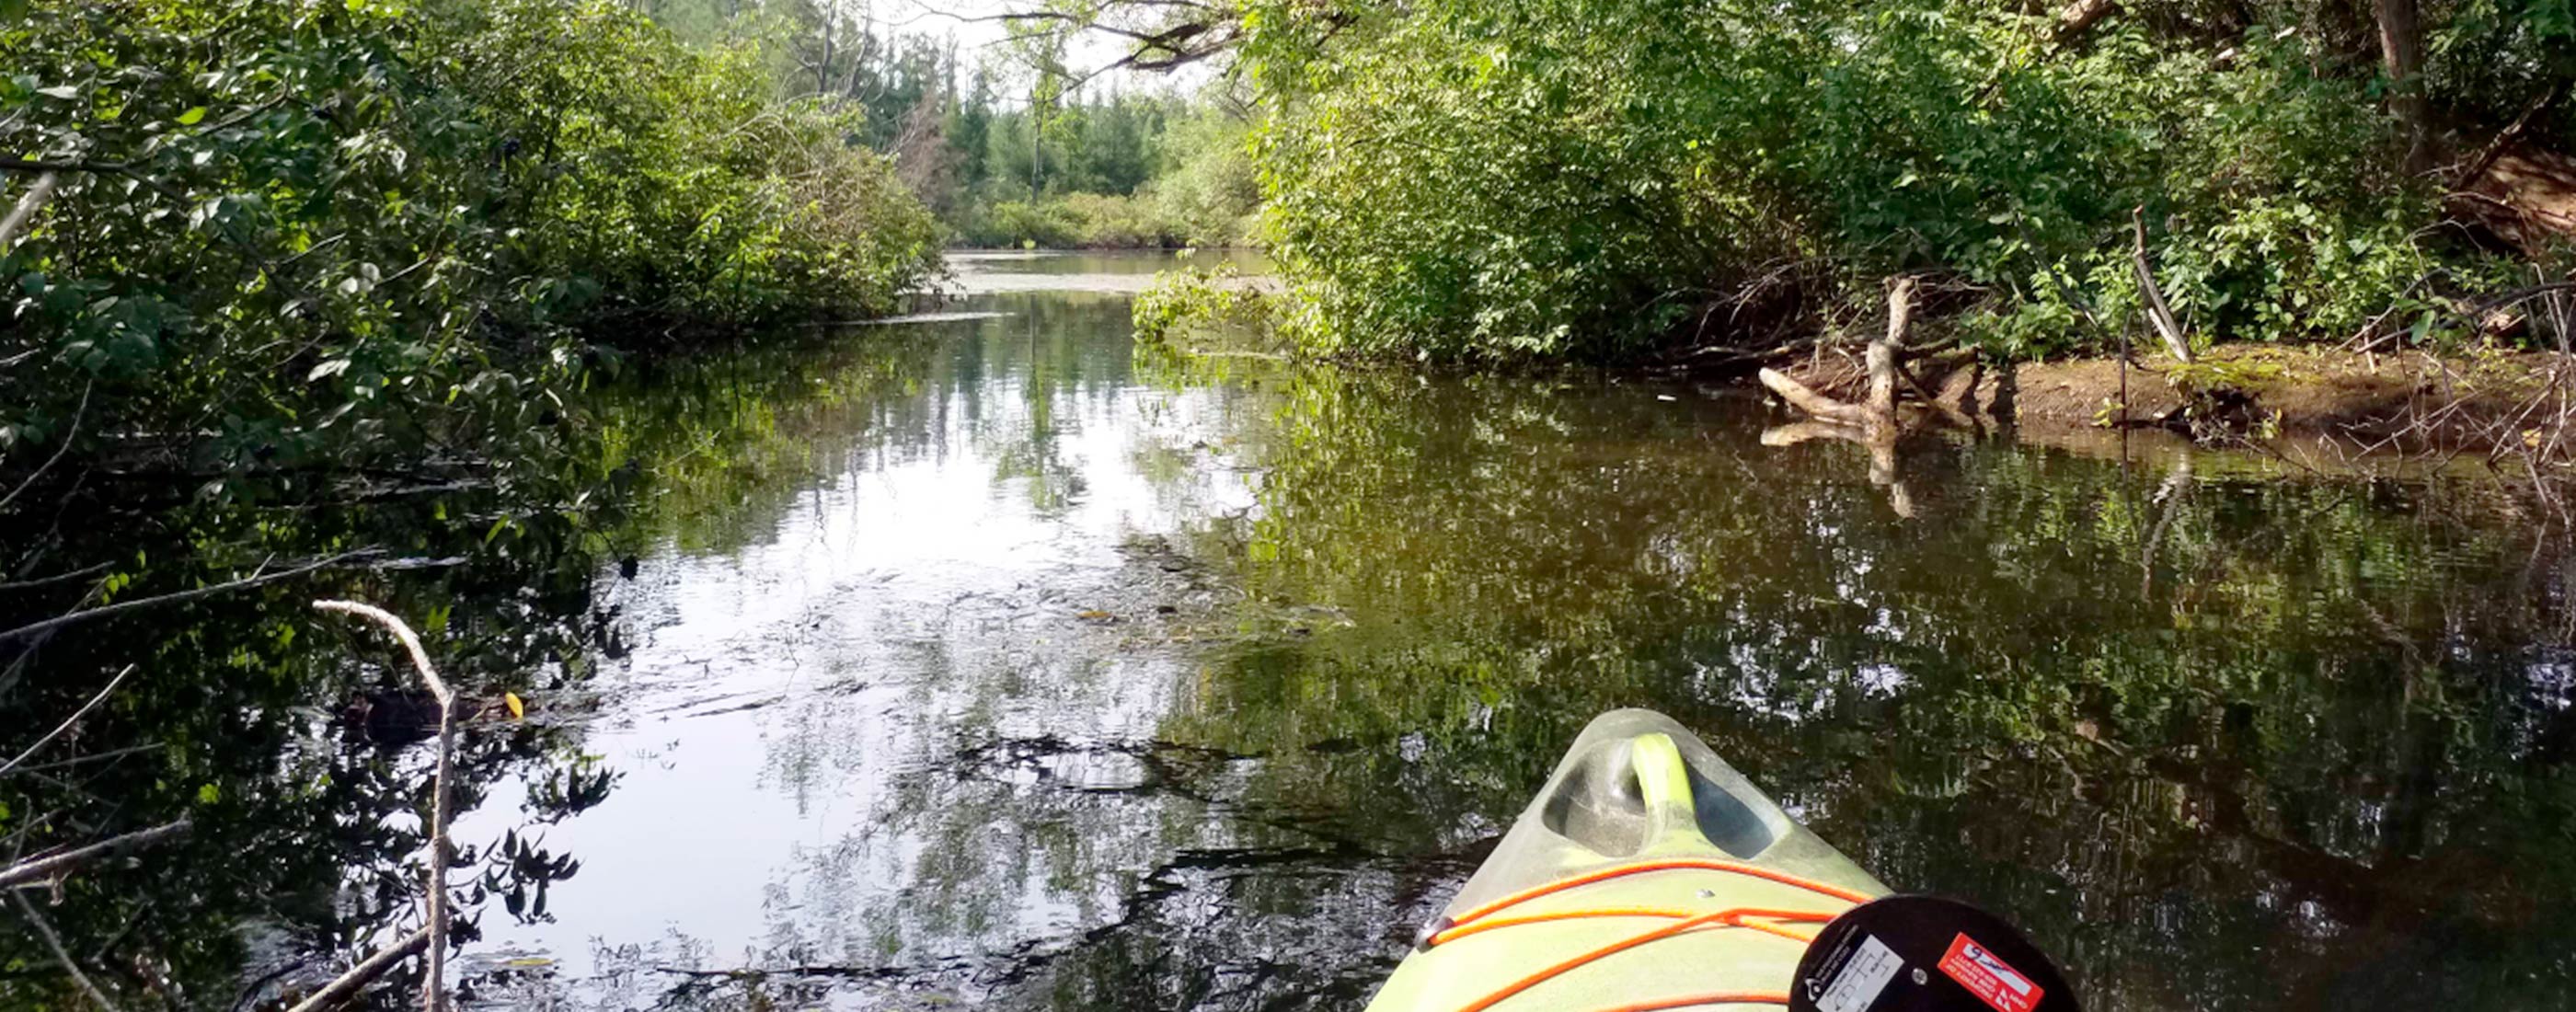 Our water team conducted condition assessments using OHM Advisors' Smart Kayak tool.